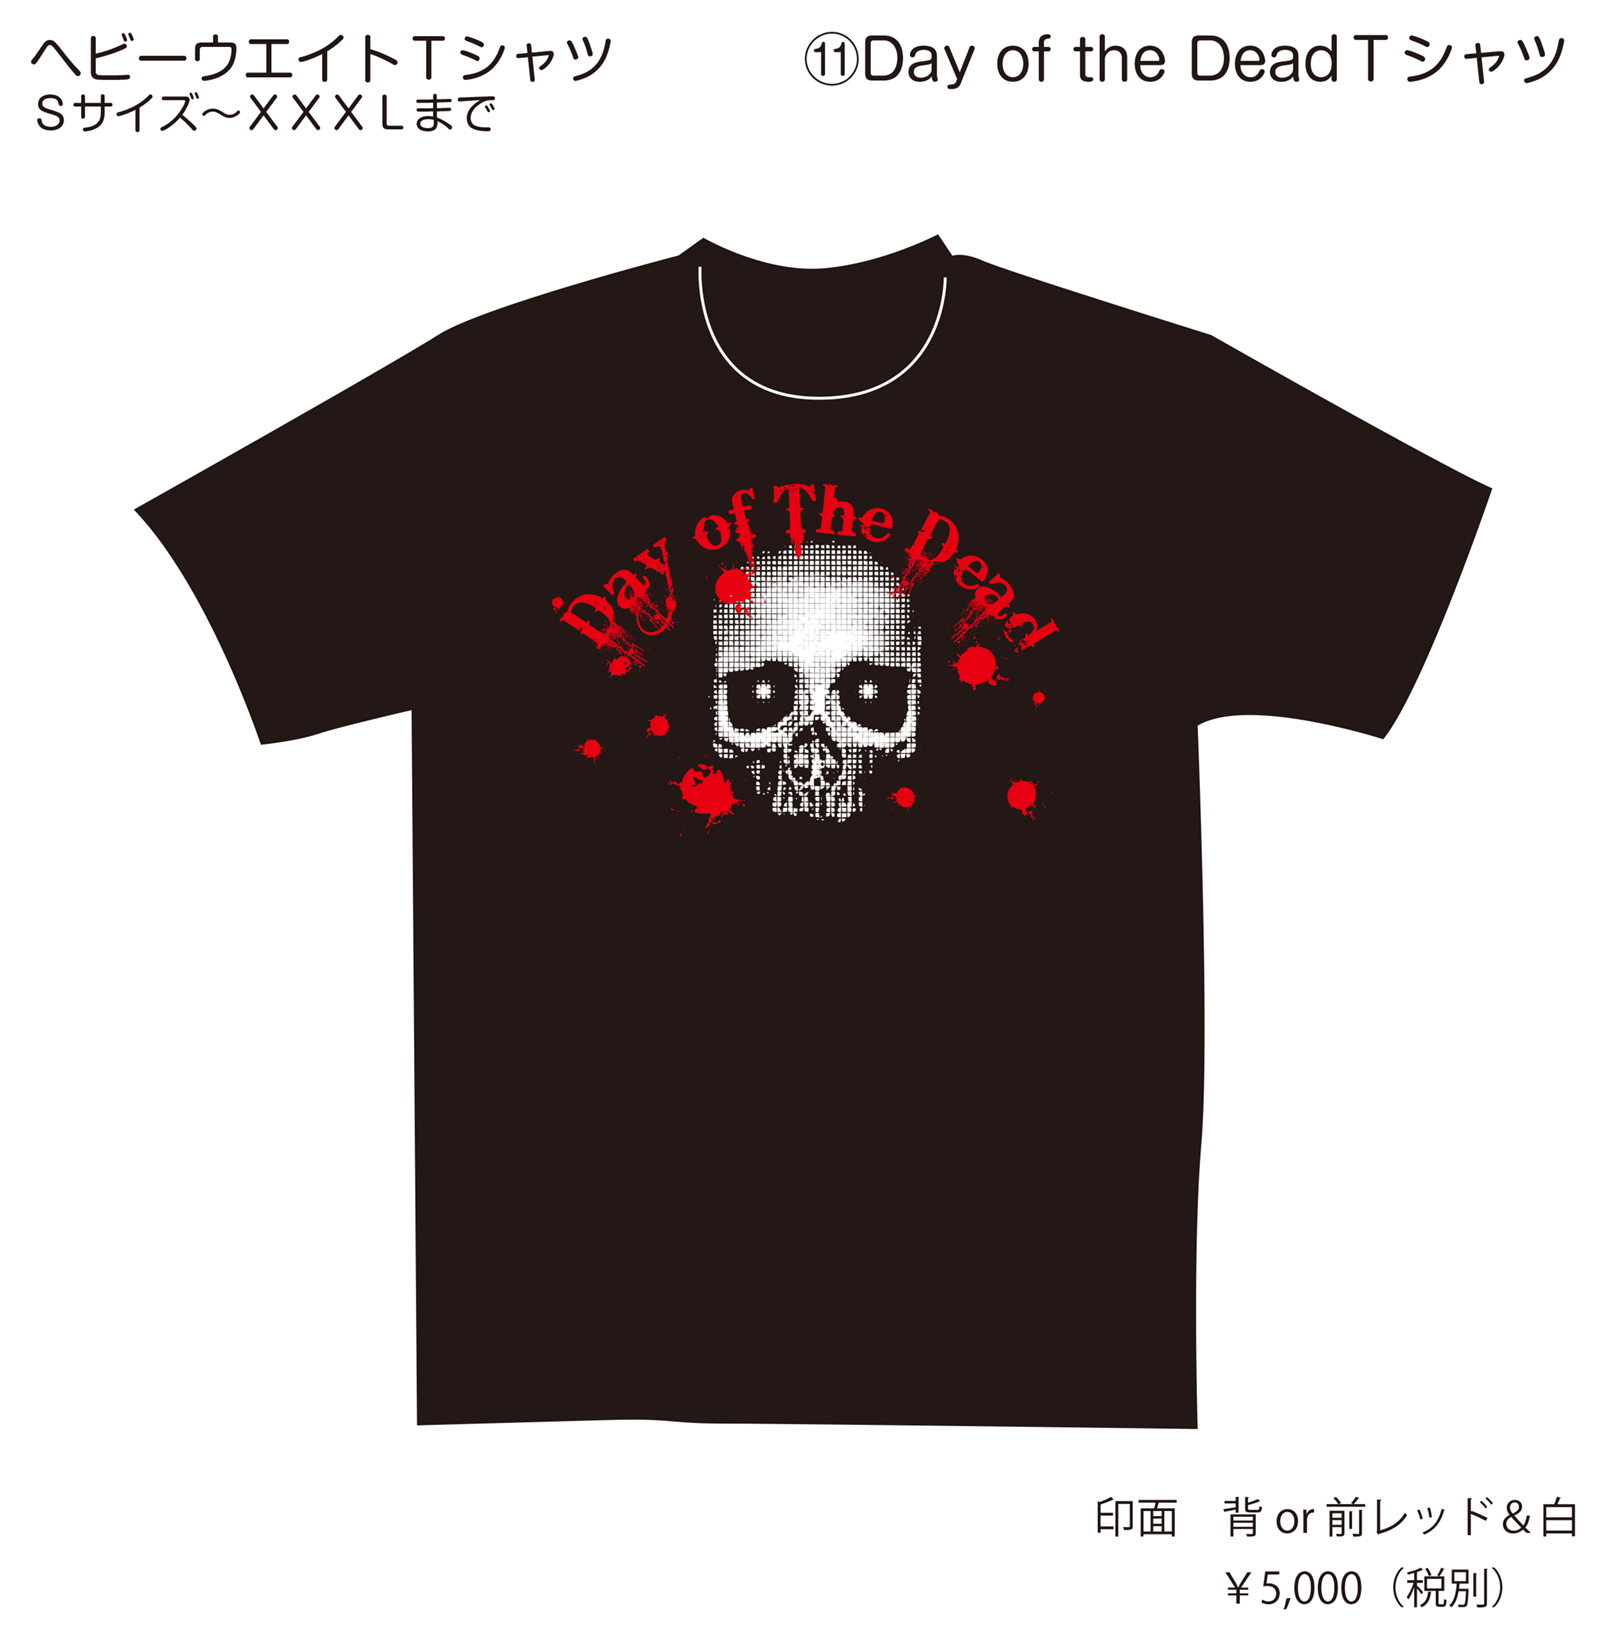 Day of the DeadＴシャツ